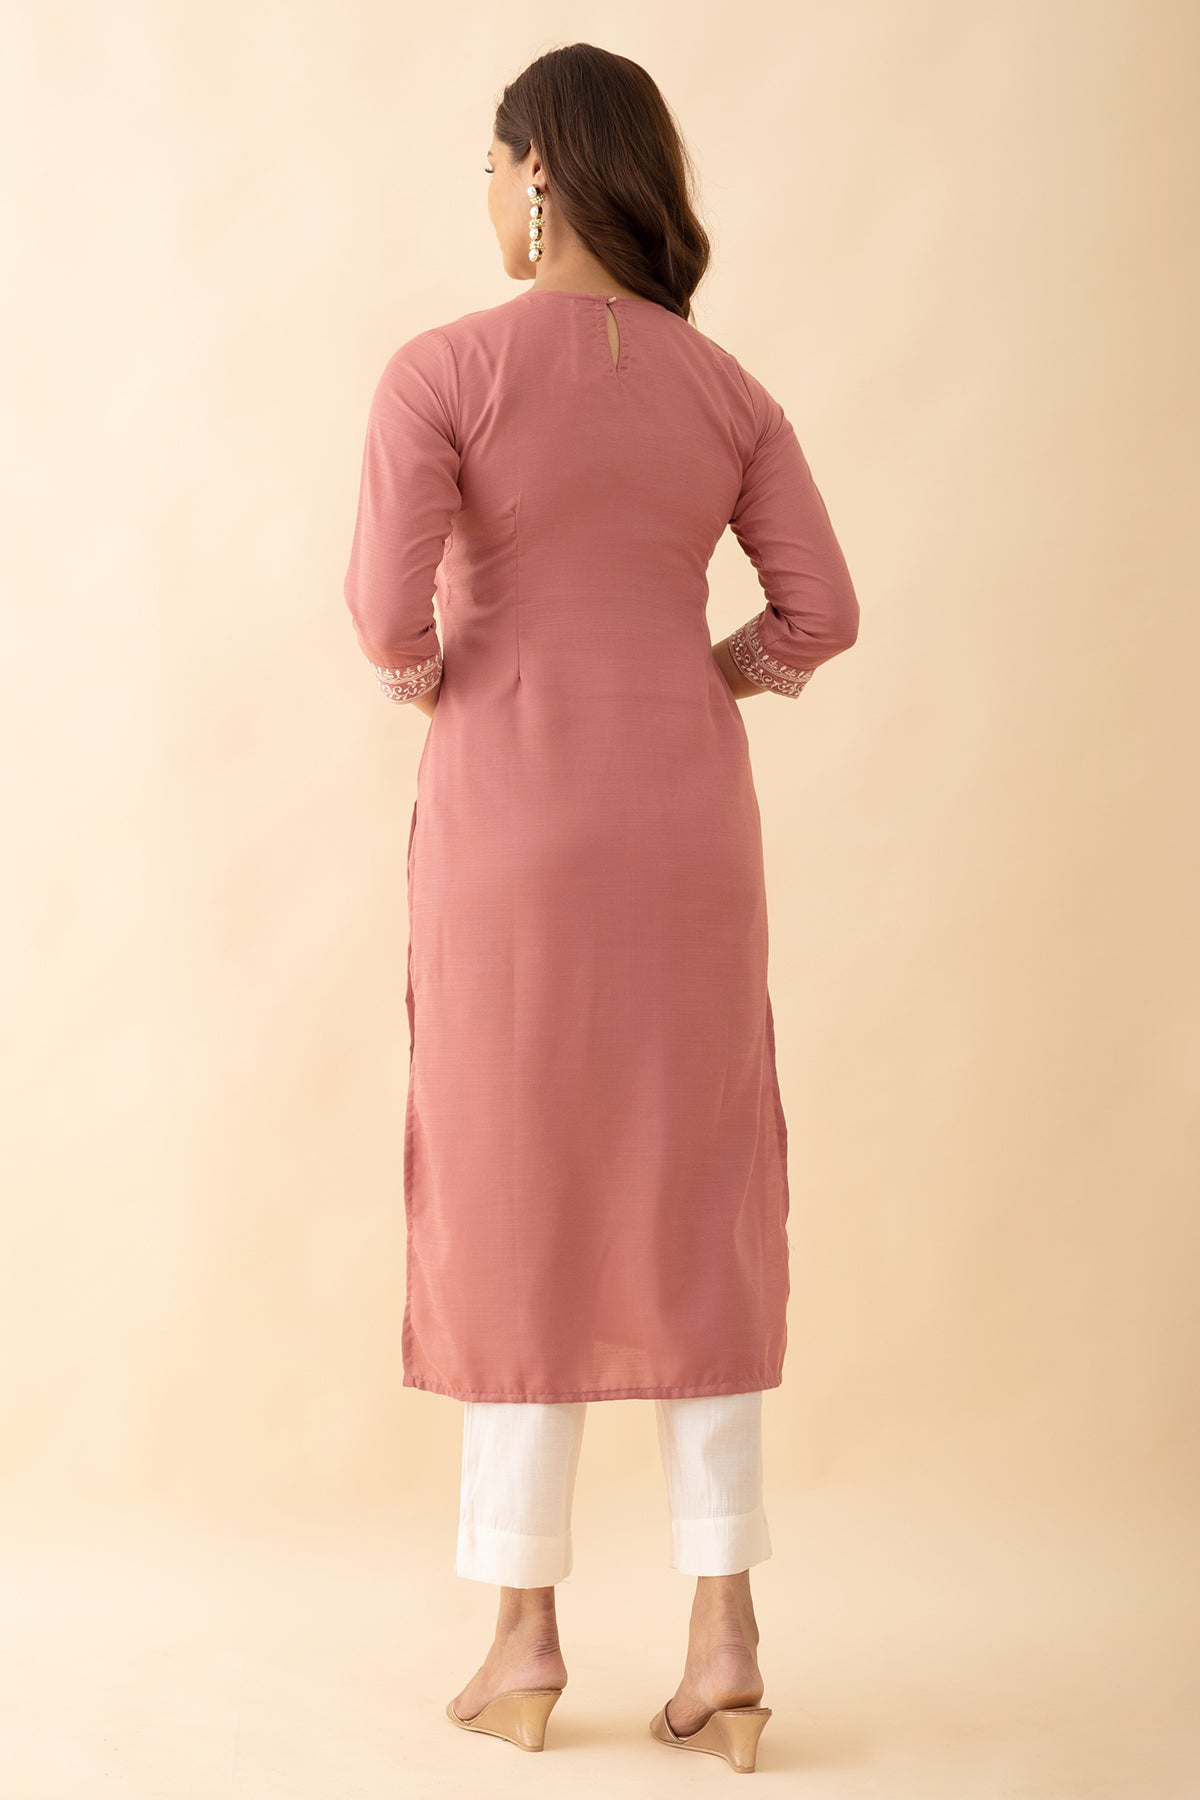 Floral Embroidered Yoke Kurta Set With Embroidered Organza Dupatta Peach Off White